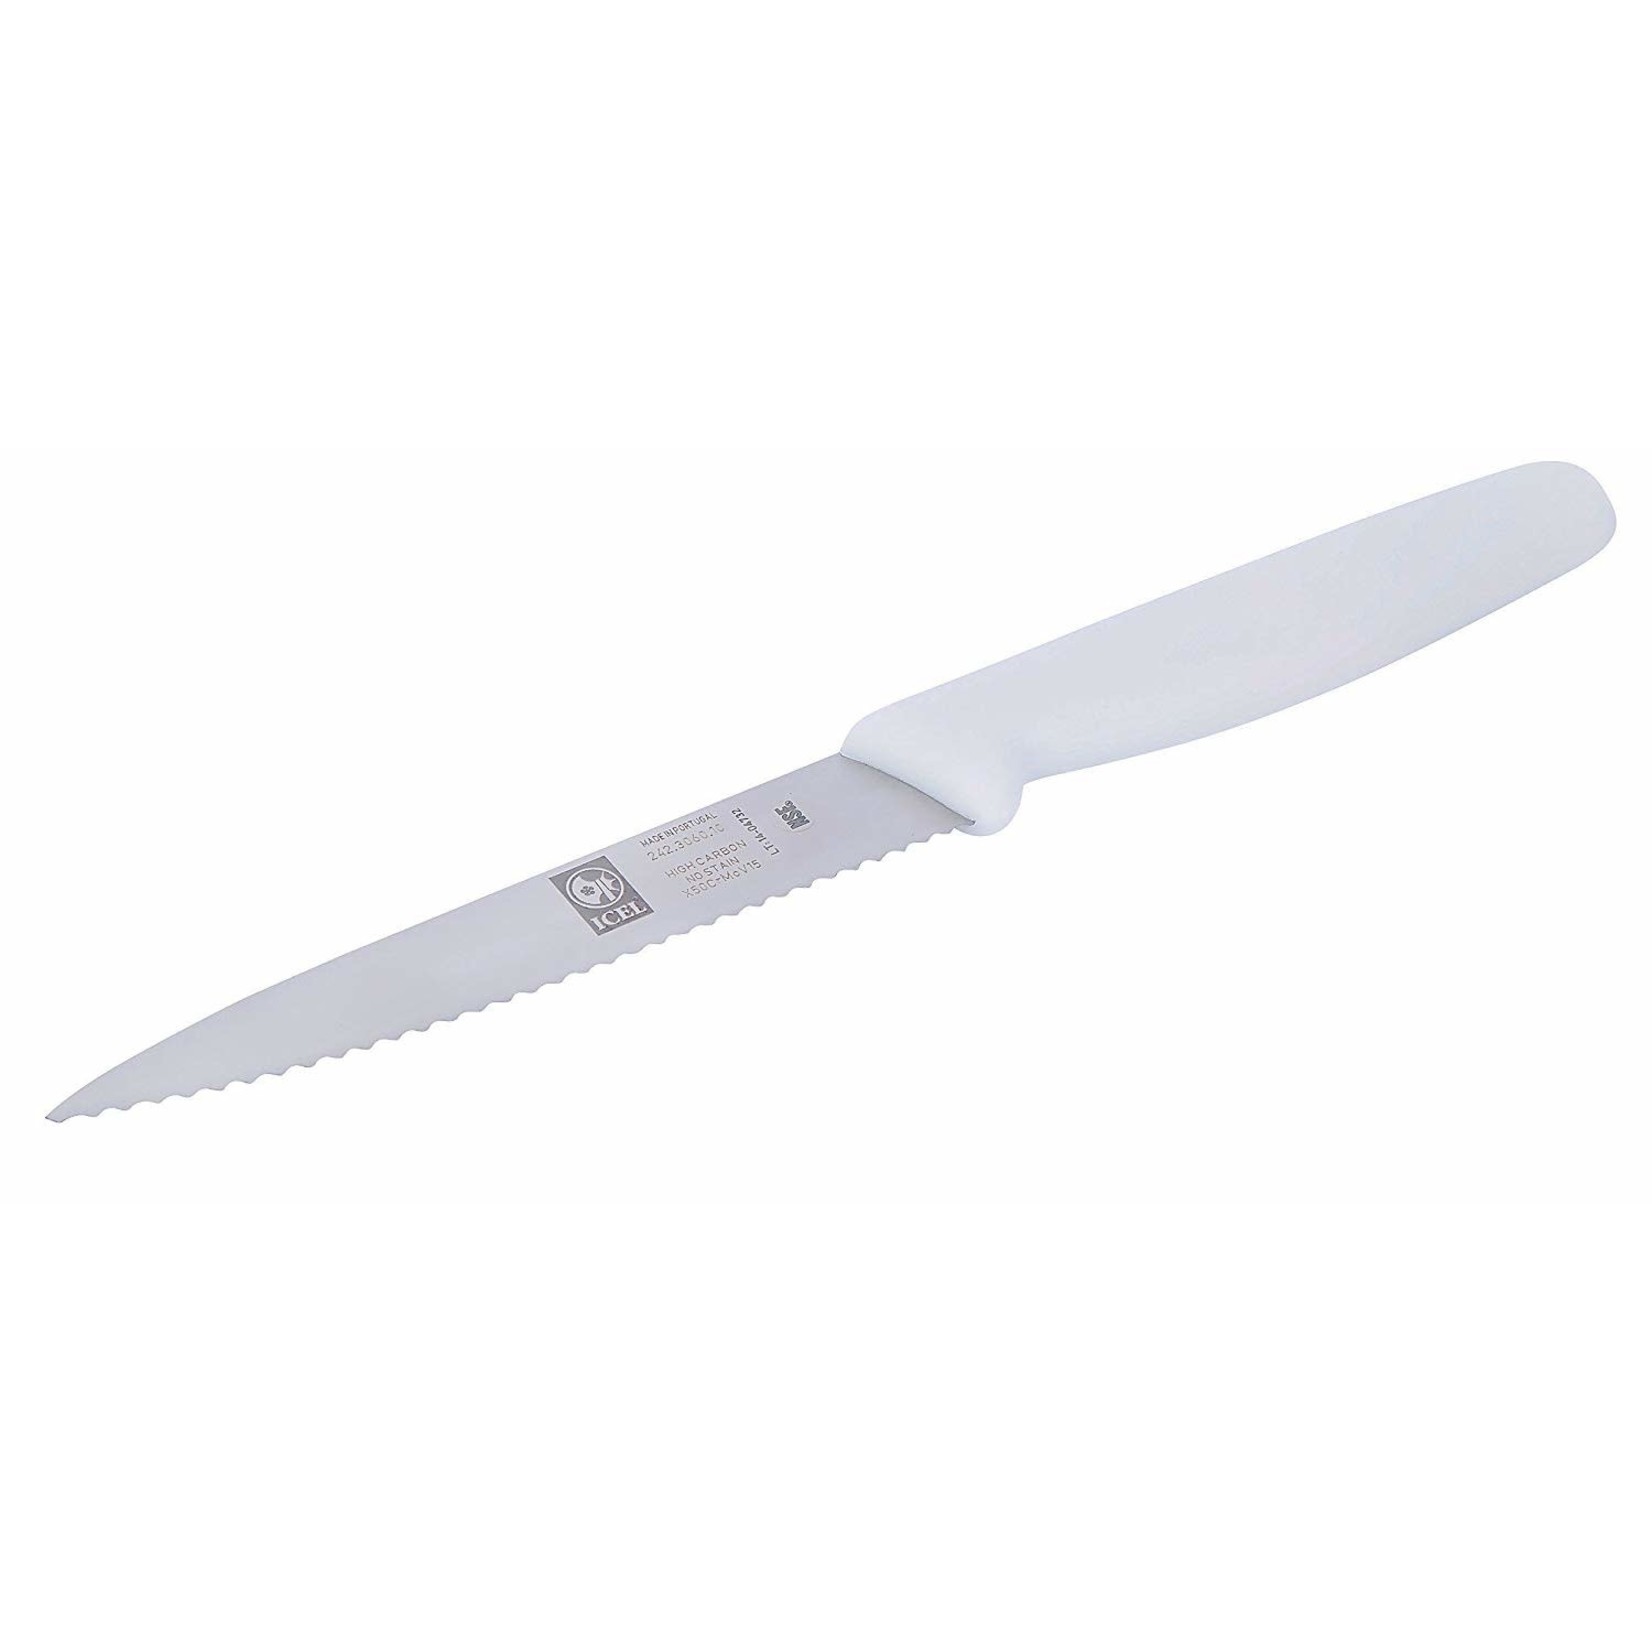 TWS Icel White 4-Inch Paring Knife, Serrated Edge - The Westview Shop